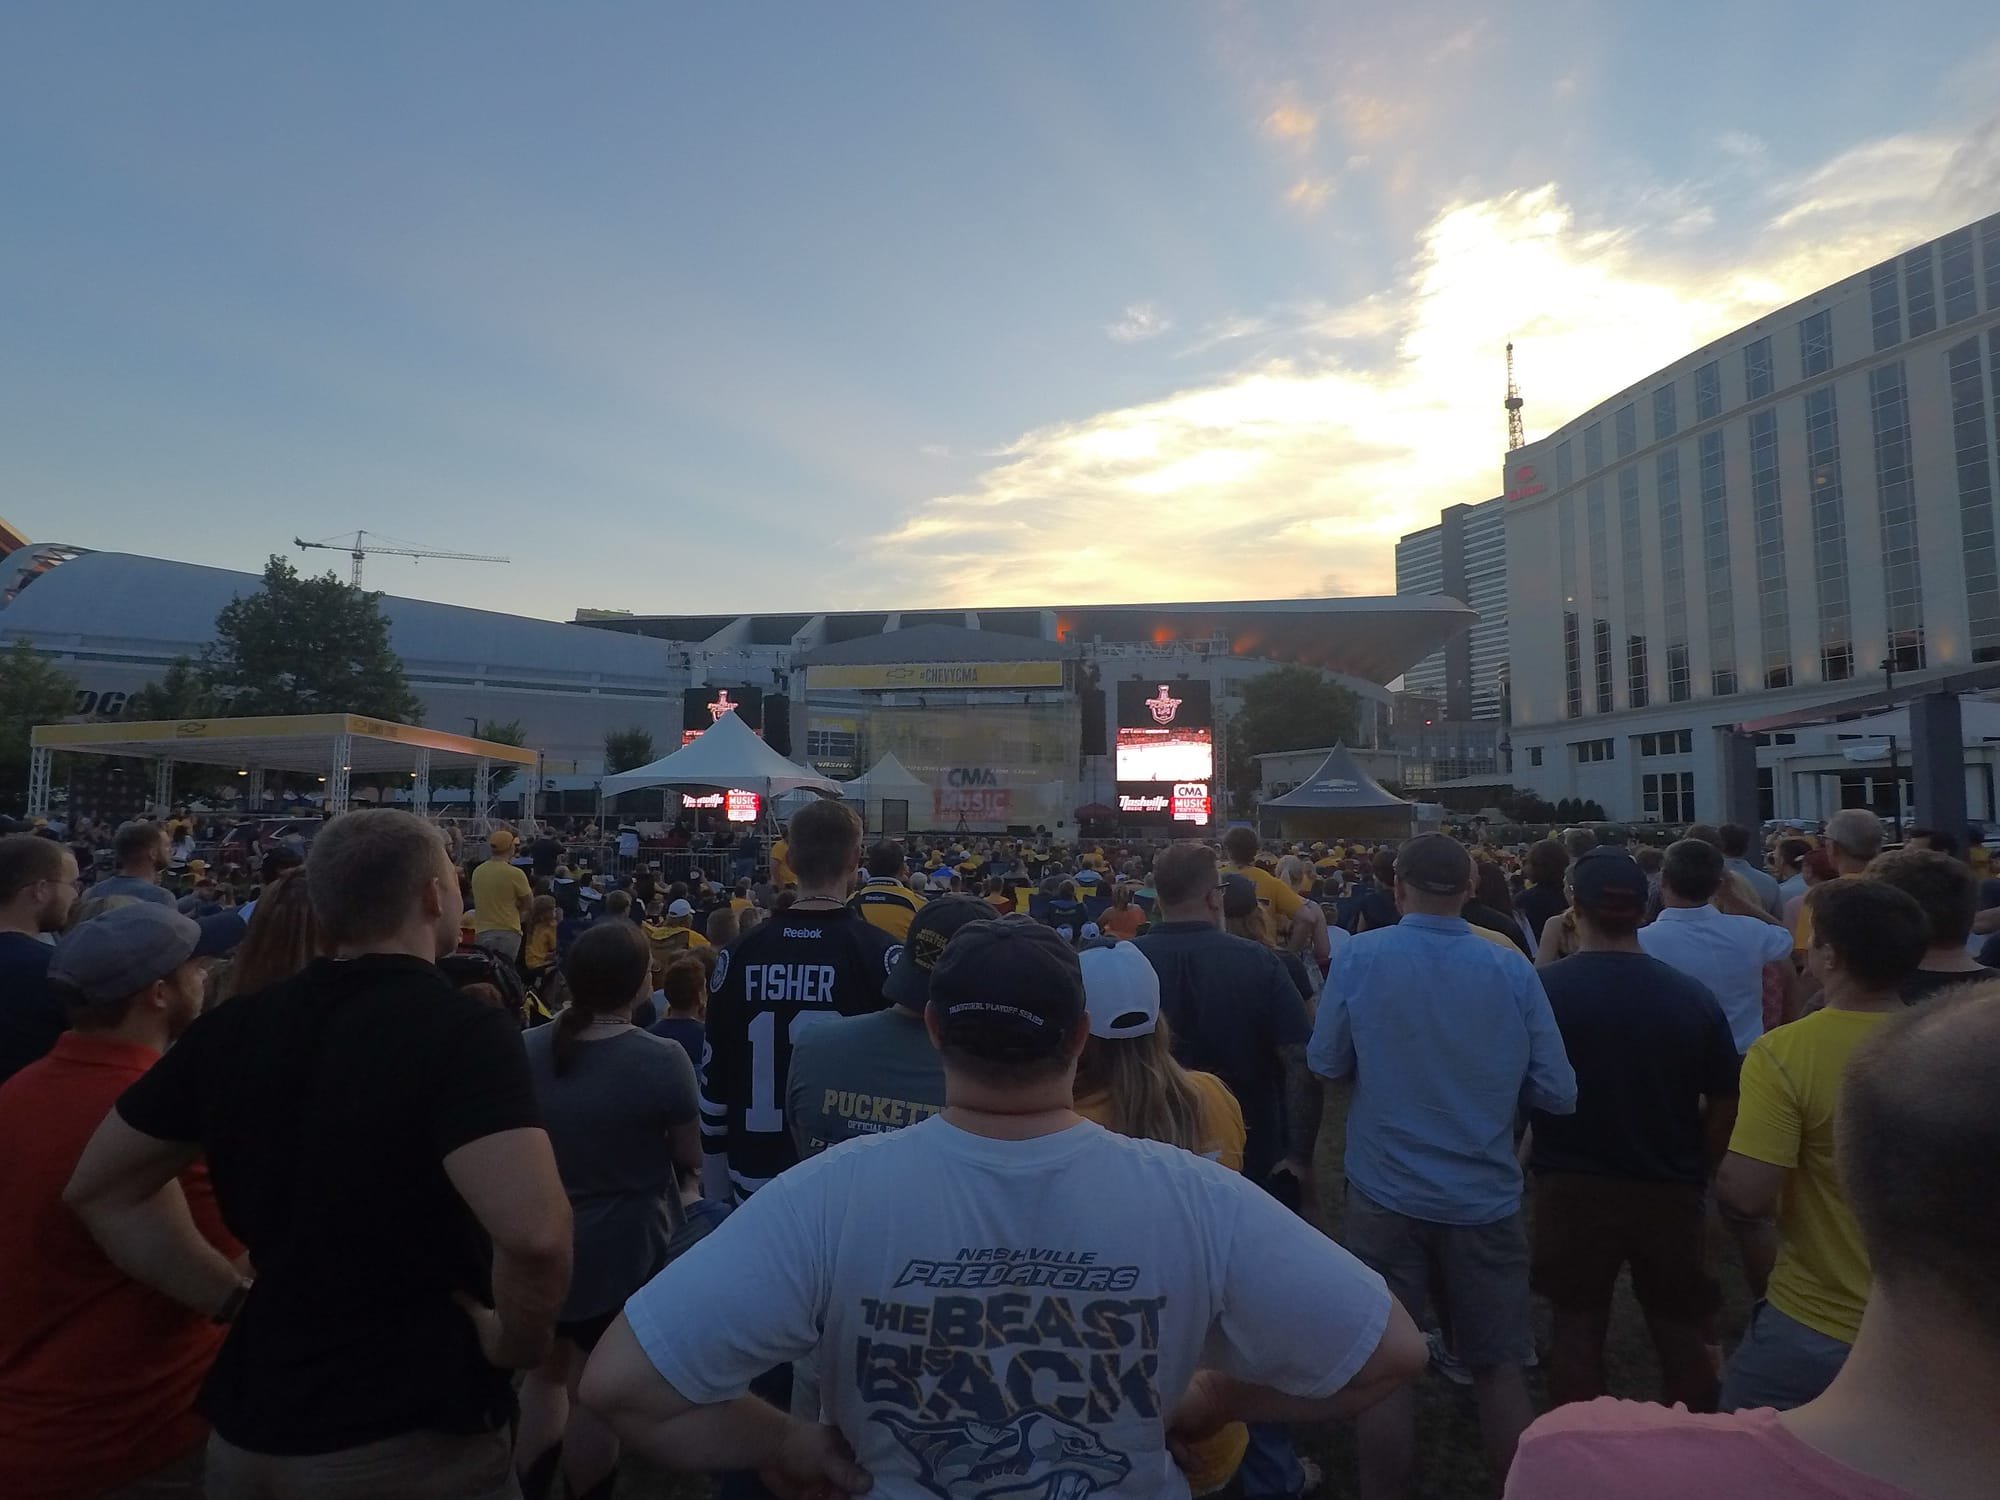 The park next to the Country Music Hall of Fame was PACKED for the Predators' game!!